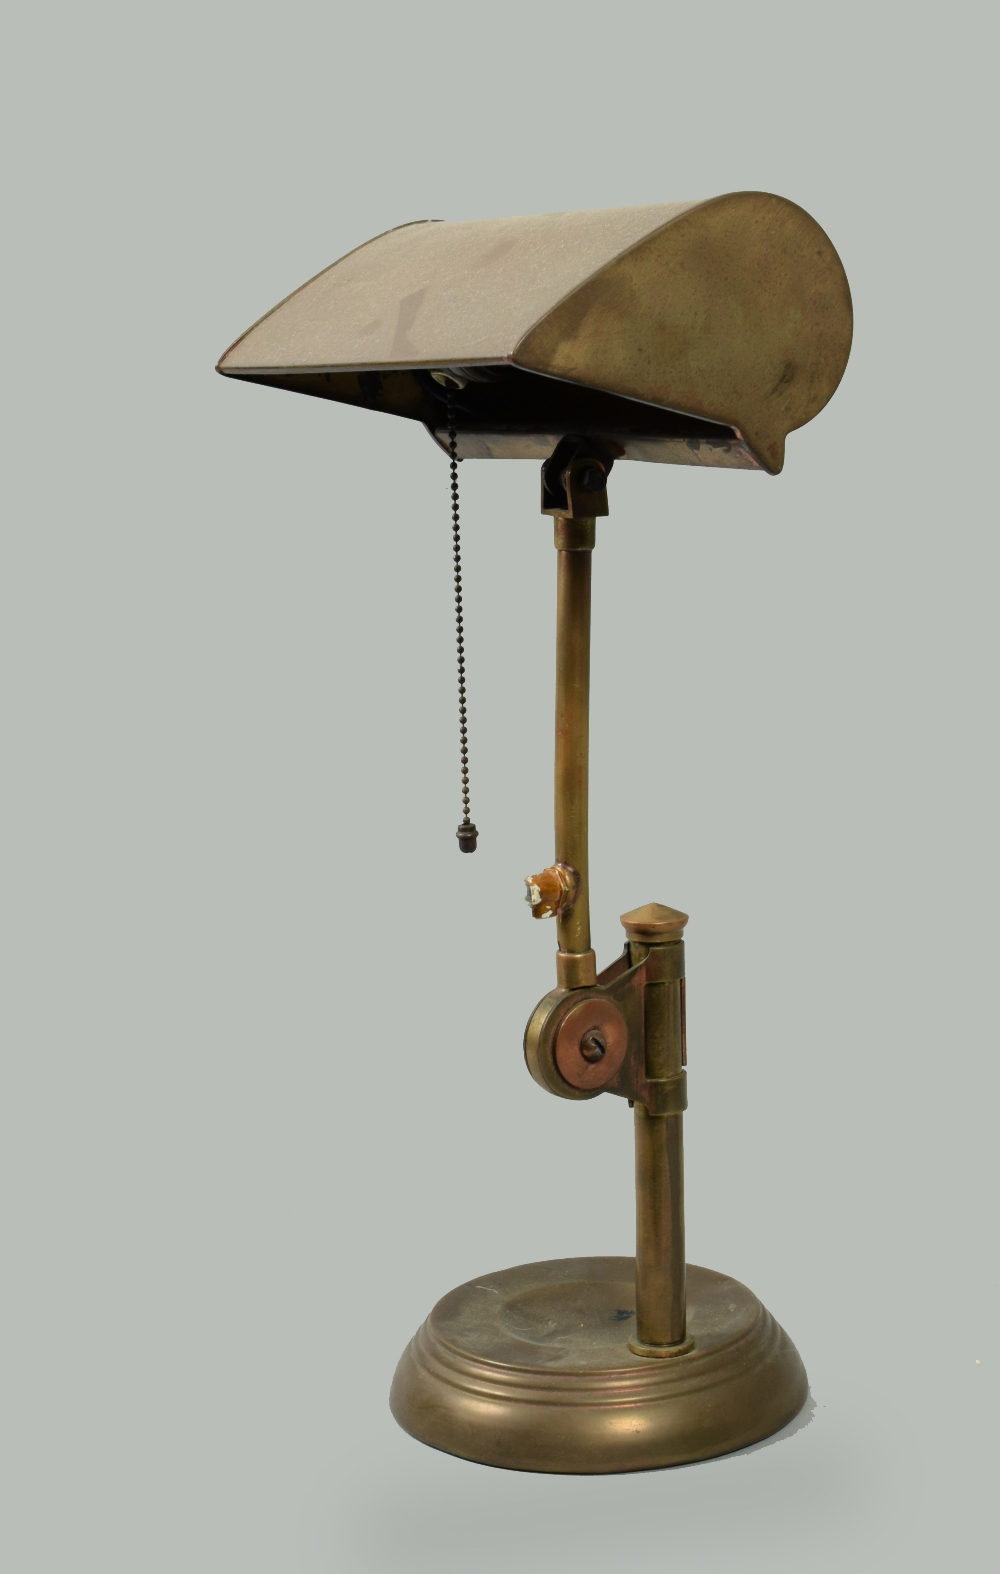 An early 20c brass desk lamp, adjustable and with shades, supported on a circular dished base, 18h.